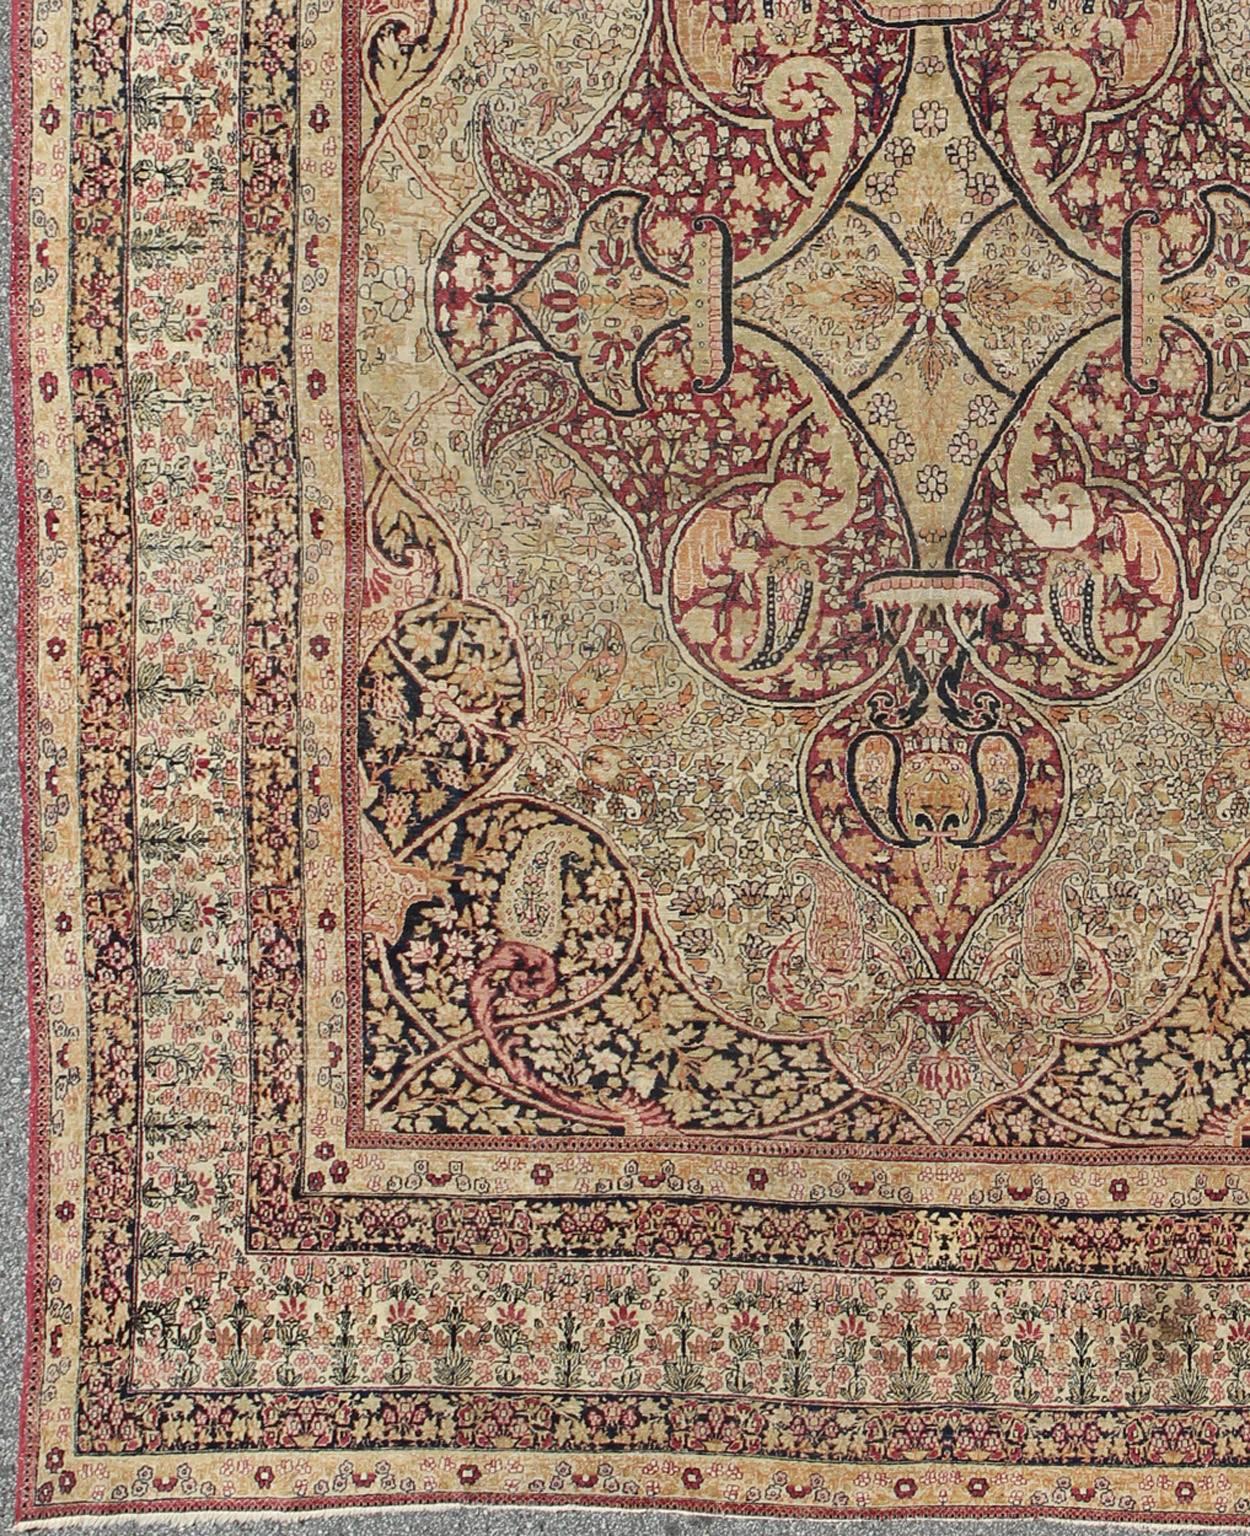 Antique 19th Century Persian Lavar Kerman Rug With Floral Medallion With Pink. Keivan Woven Arts/  rug 11-20916, country of origin / type: Persia/Iran / Lavar Kerman/Ravar Kerman 
Measures: 10'4 x 14'6.
This 19th century Persian Lavar Kerman/Ravar